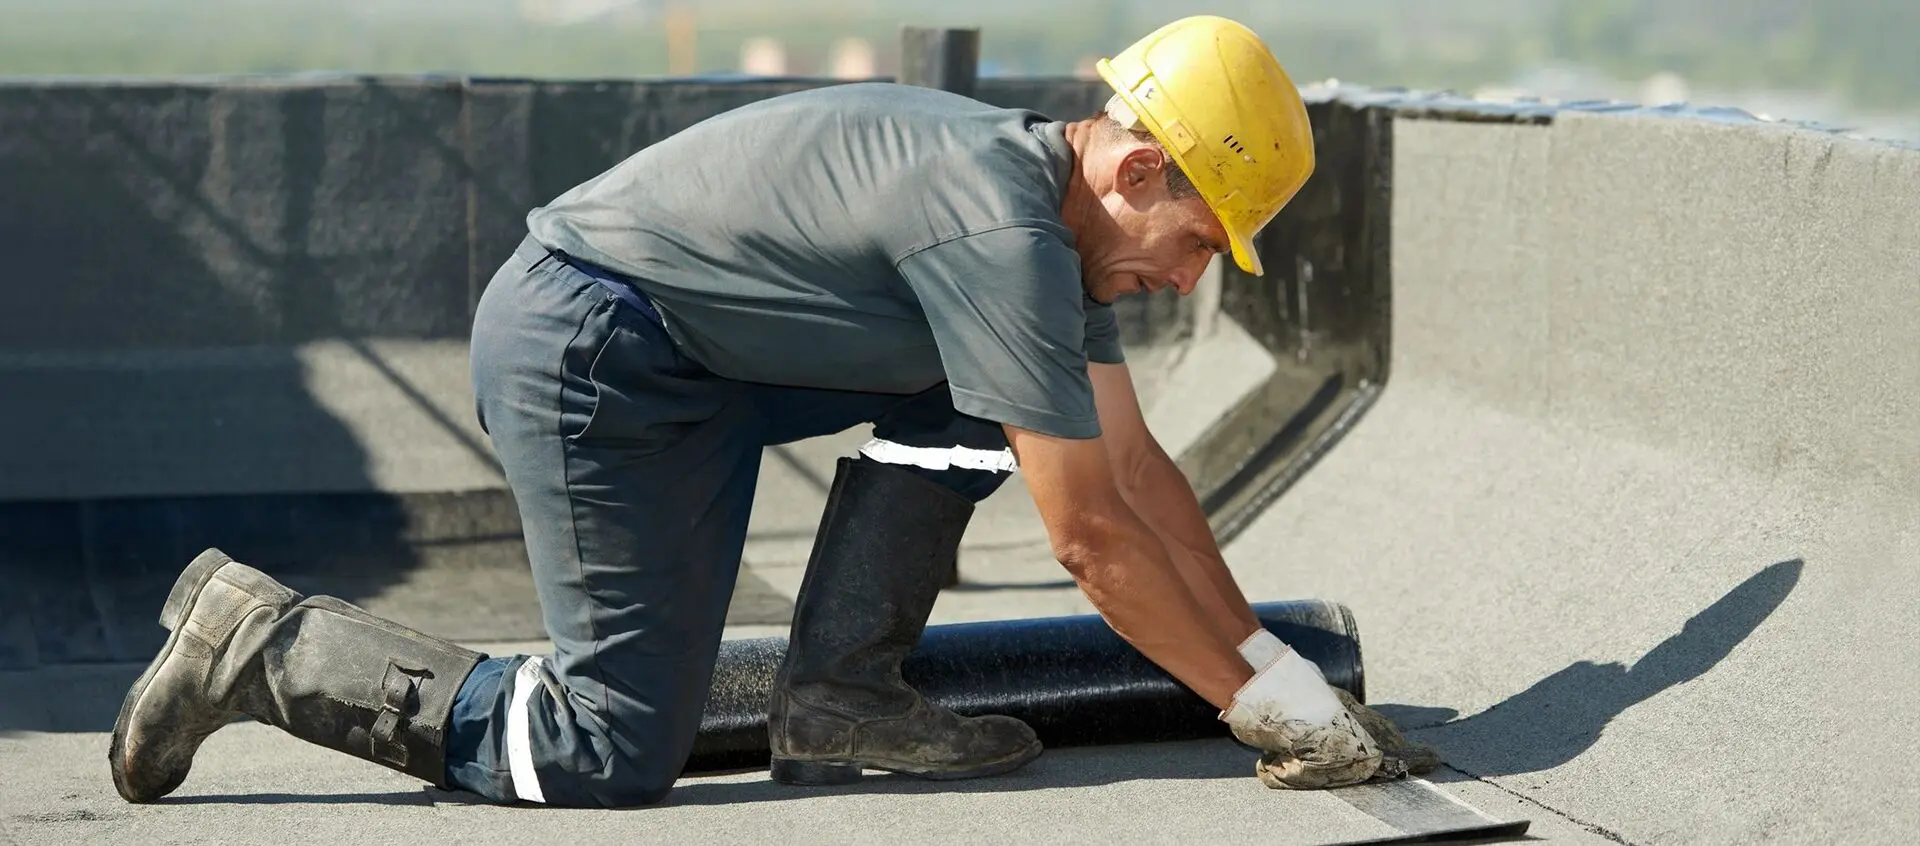 A man wearing a hard hat and gloves rolling a roll of water.